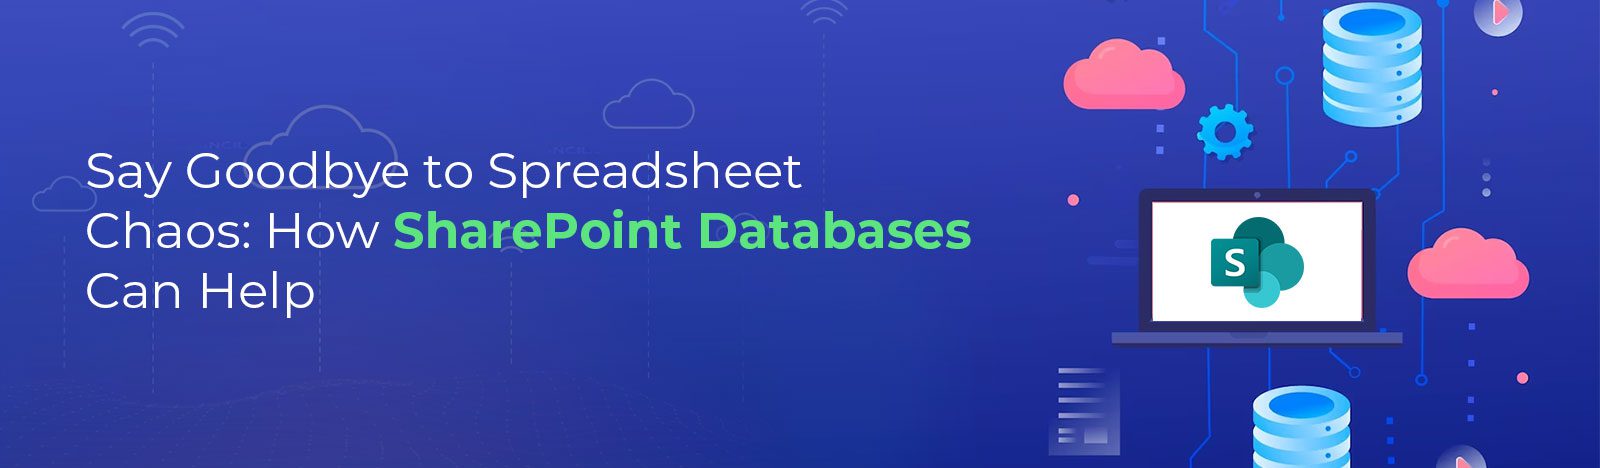 Say Goodbye to Spreadsheet Chaos: How SharePoint Databases Can Help